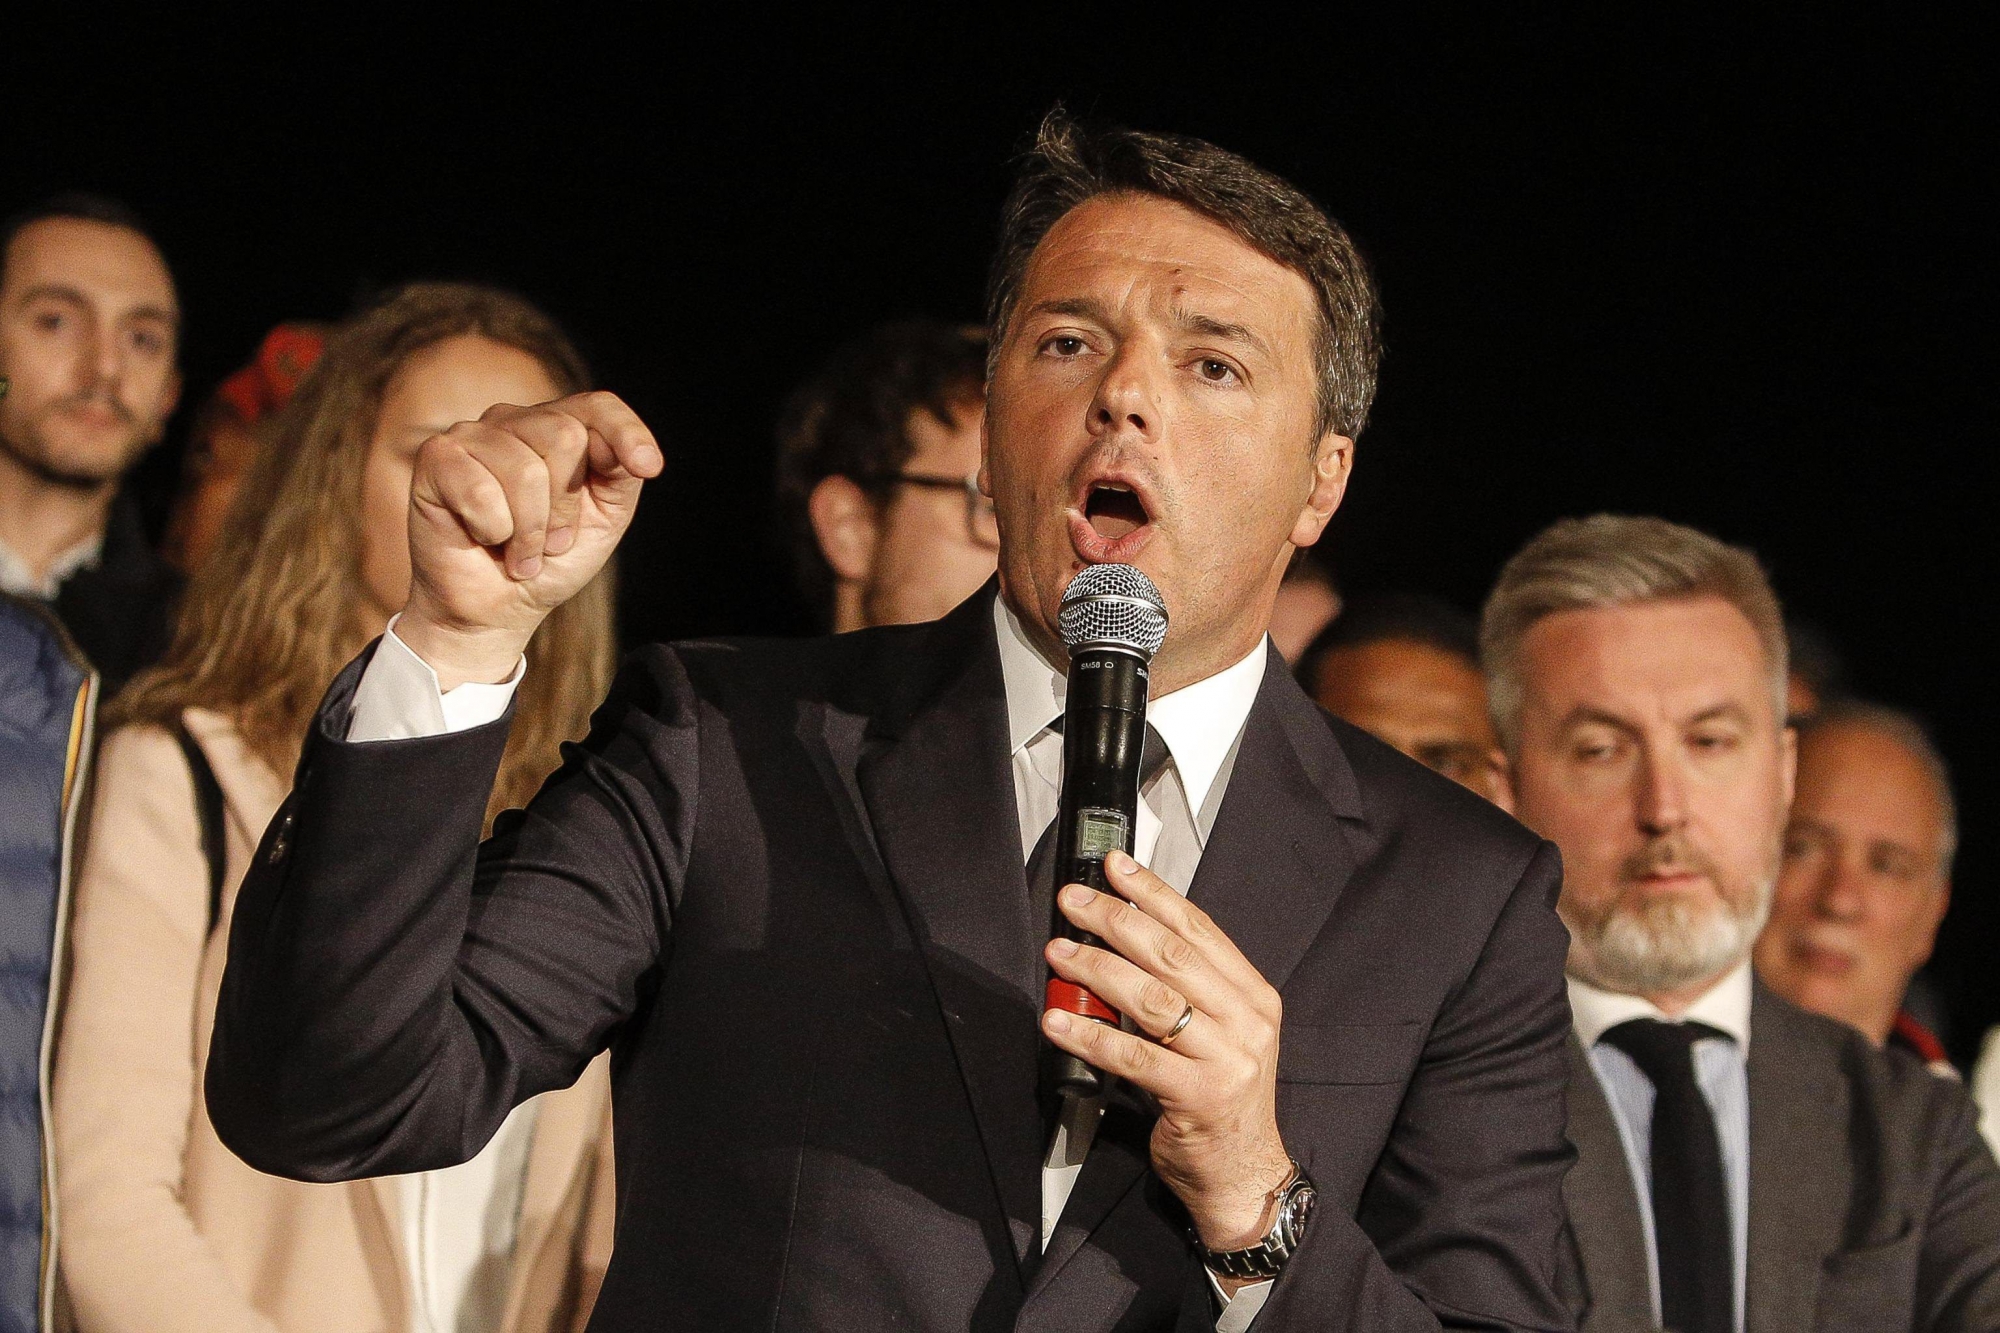 epa05937984 Former Italian premier Matteo Renzi addresses supporters after winning the Democratic party's primary elections and gaining leadership of Italy's ruling Democratic Party (PD) party in Rome, Italy, 30 April 2017.  EPA/GIUSEPPE LAMI ITALY ELECTIONS PRIMARIES